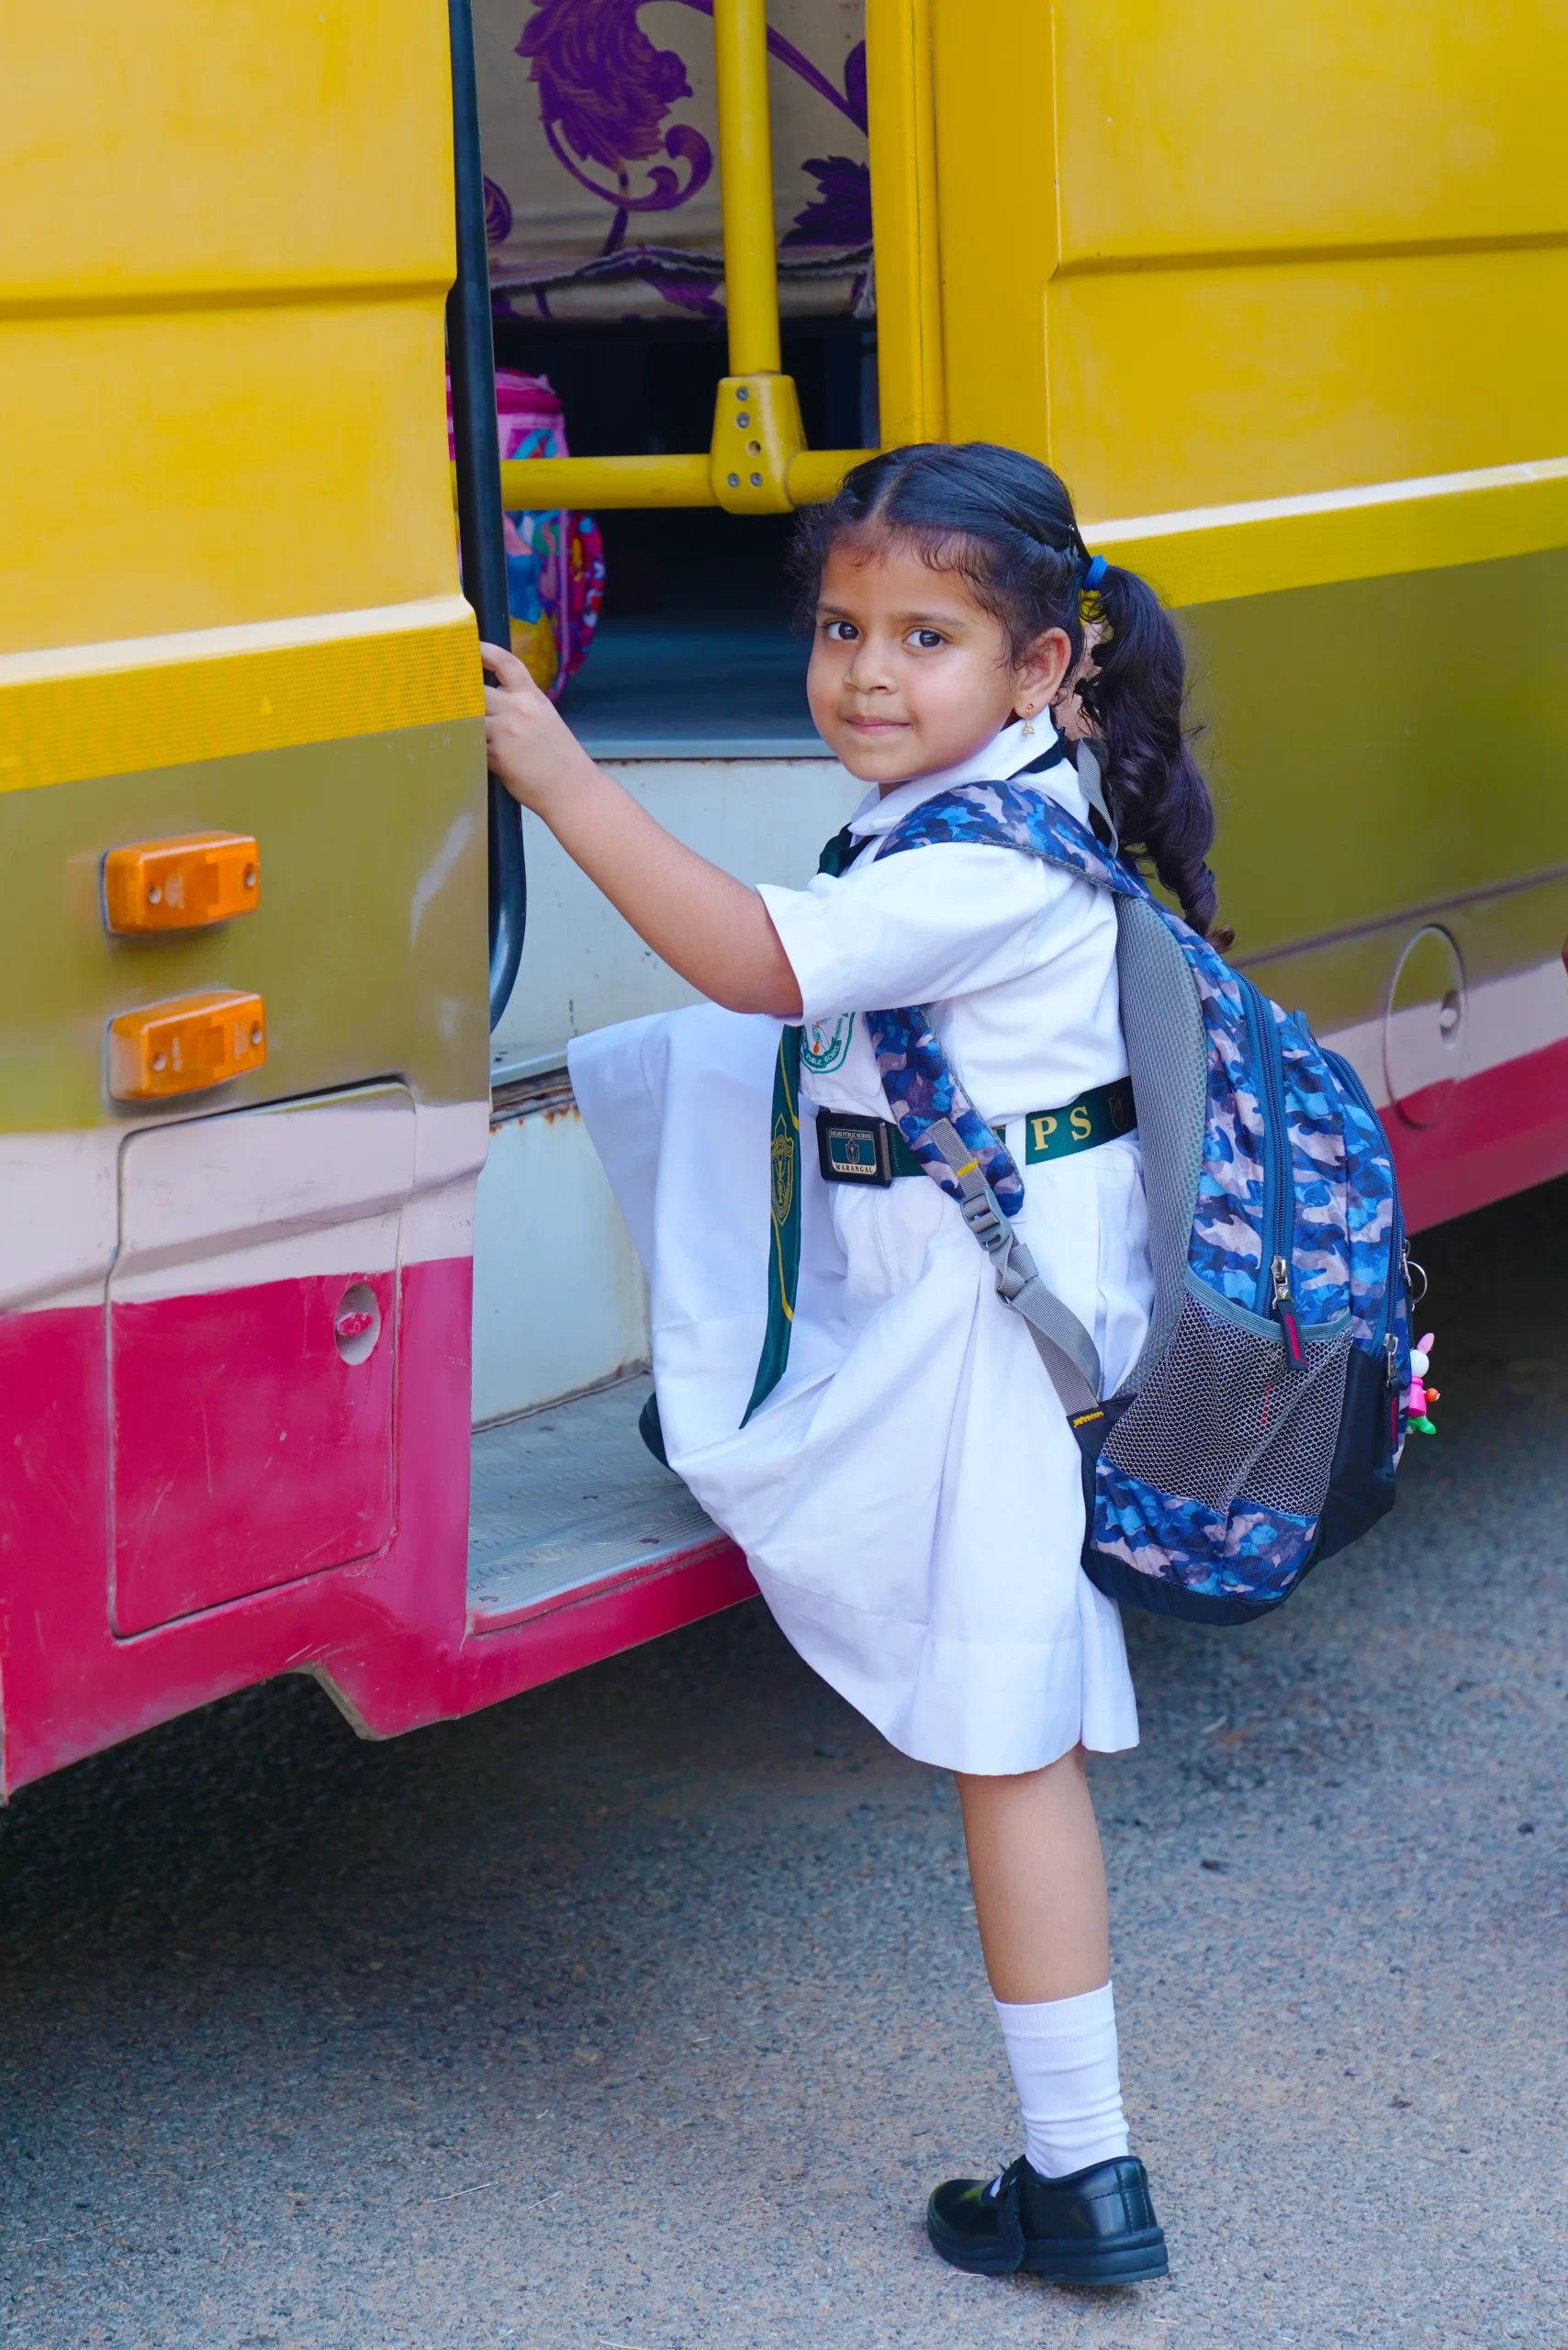 One small girl getting into the school bus at DPS Warangal.